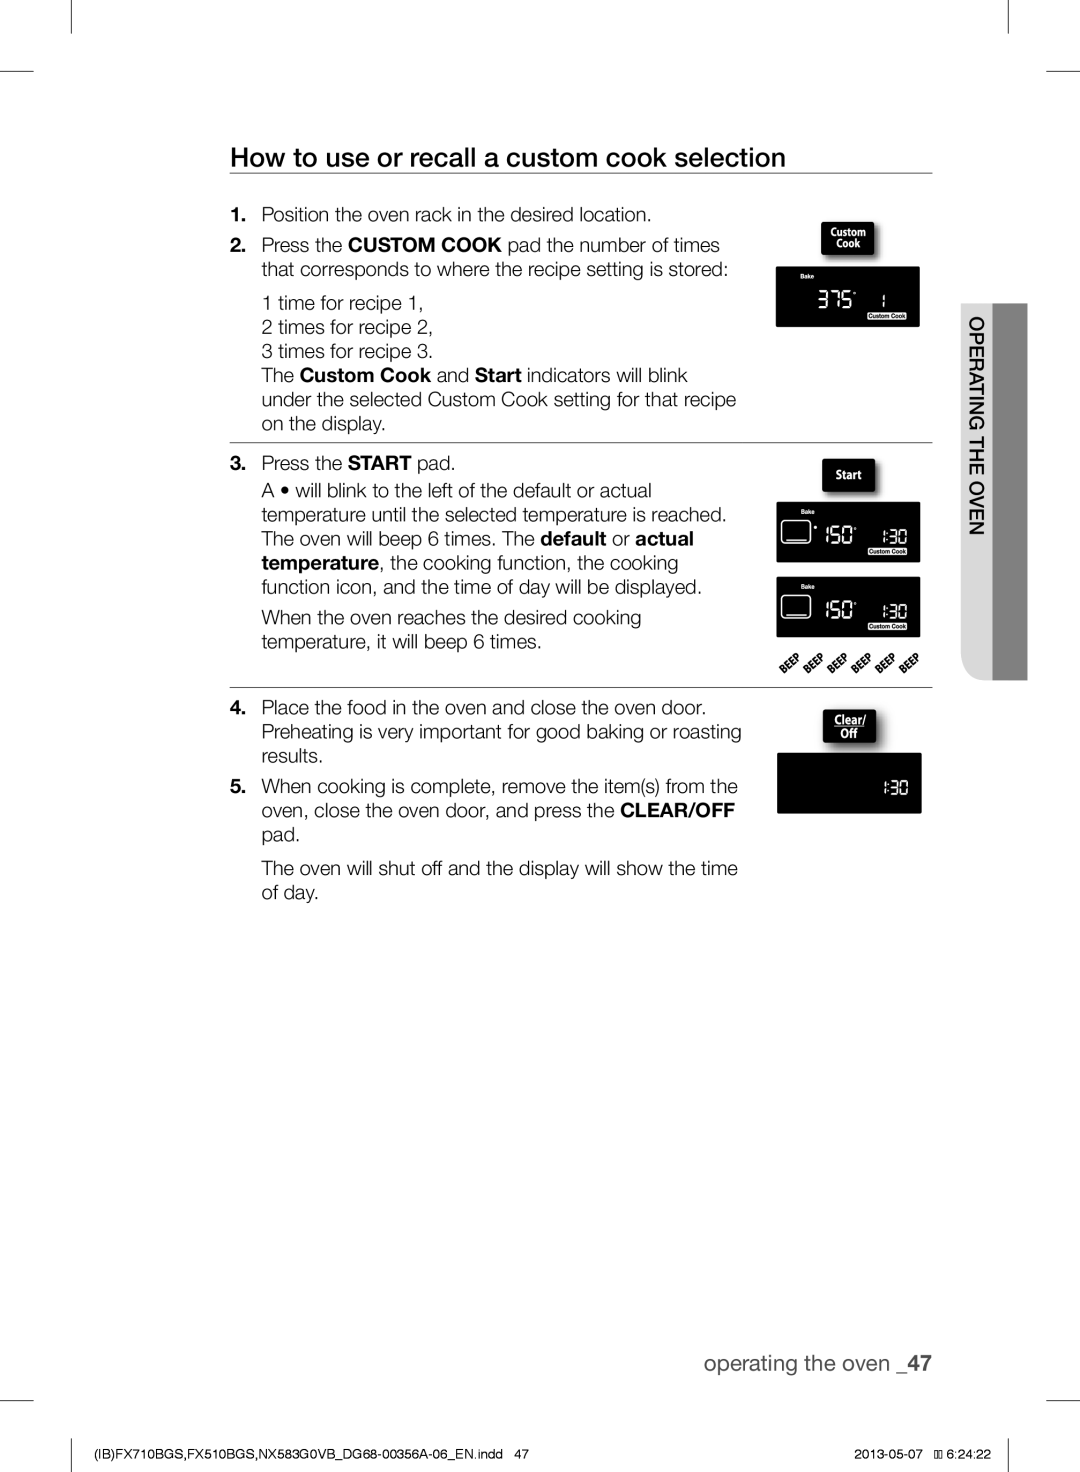 Samsung NX583GOVBWW, NX583GOVBBB, NX583GOVBSR, FX510BGS How to use or recall a custom cook selection, operating the oven 